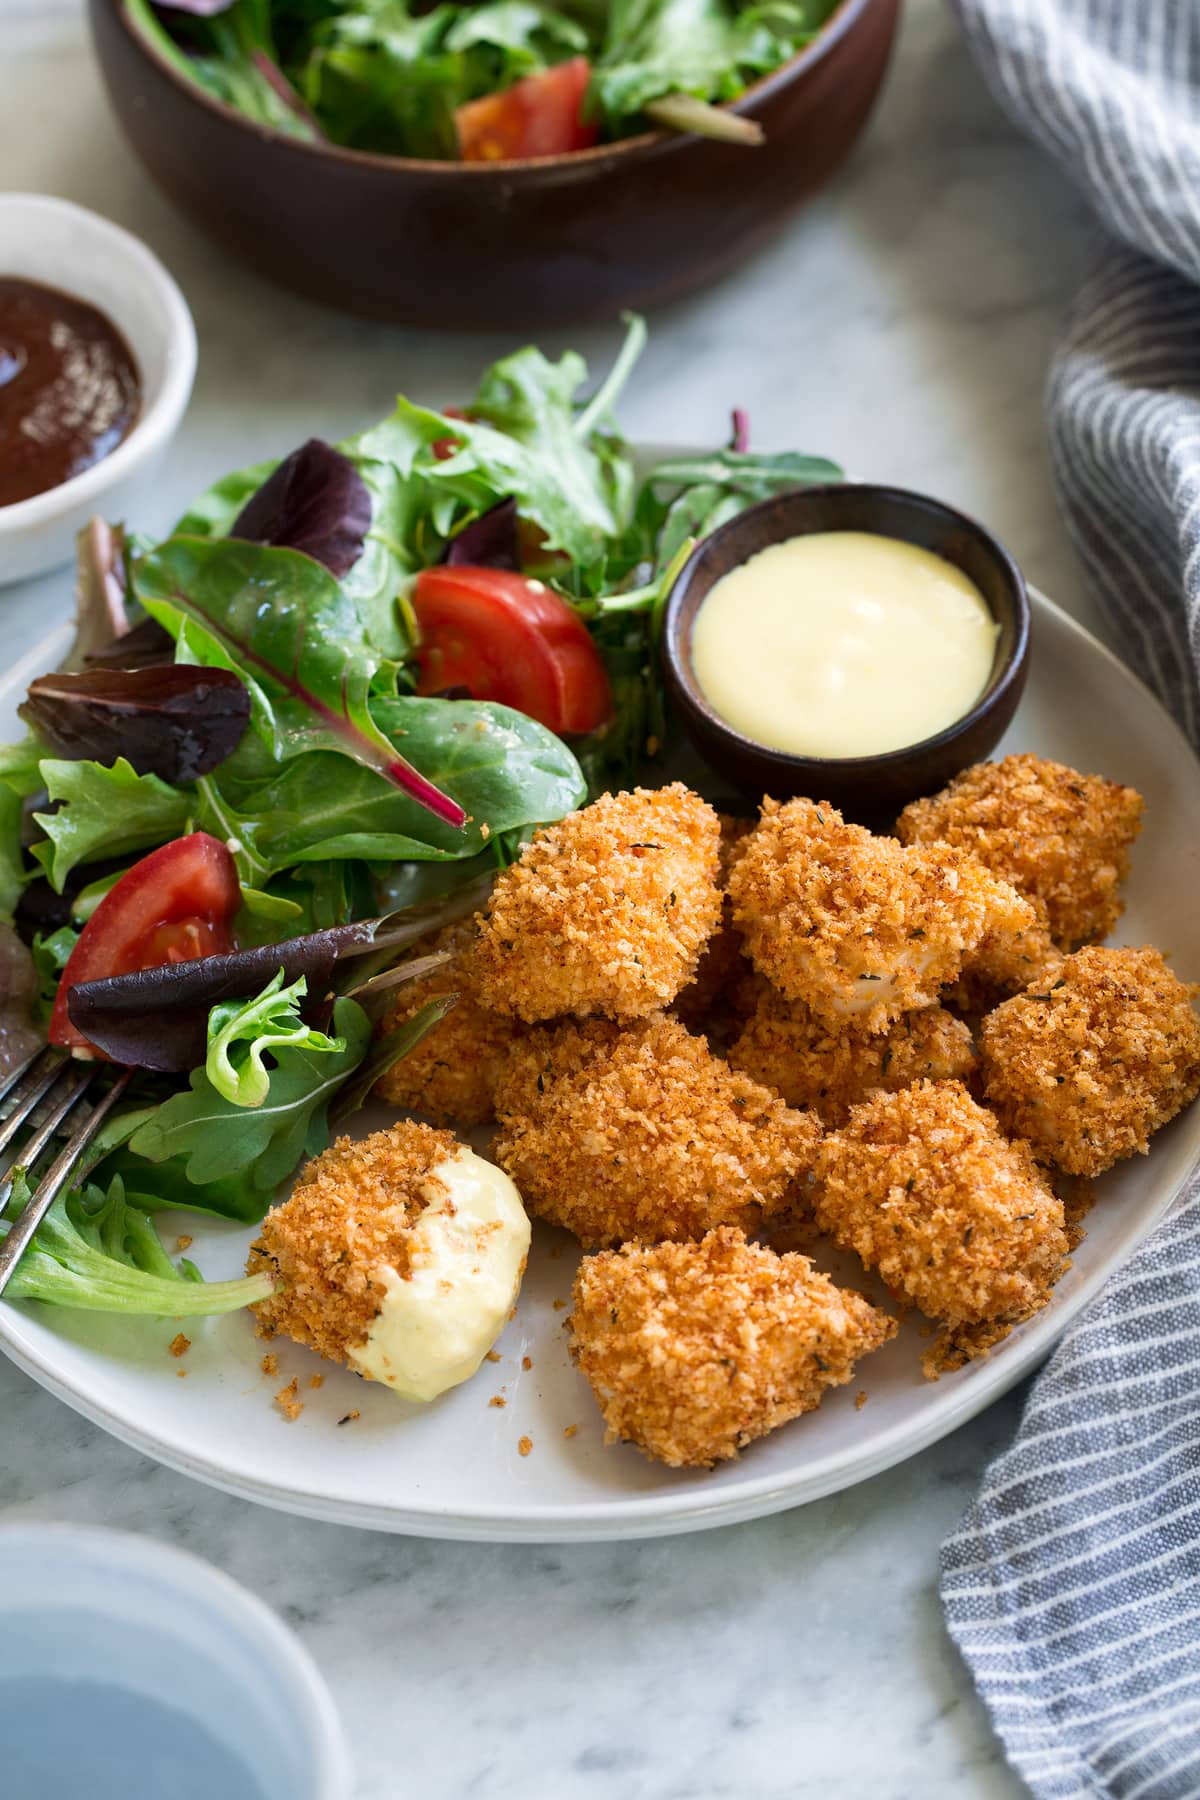 Chicken Nuggets on a serving plate with a side salad.